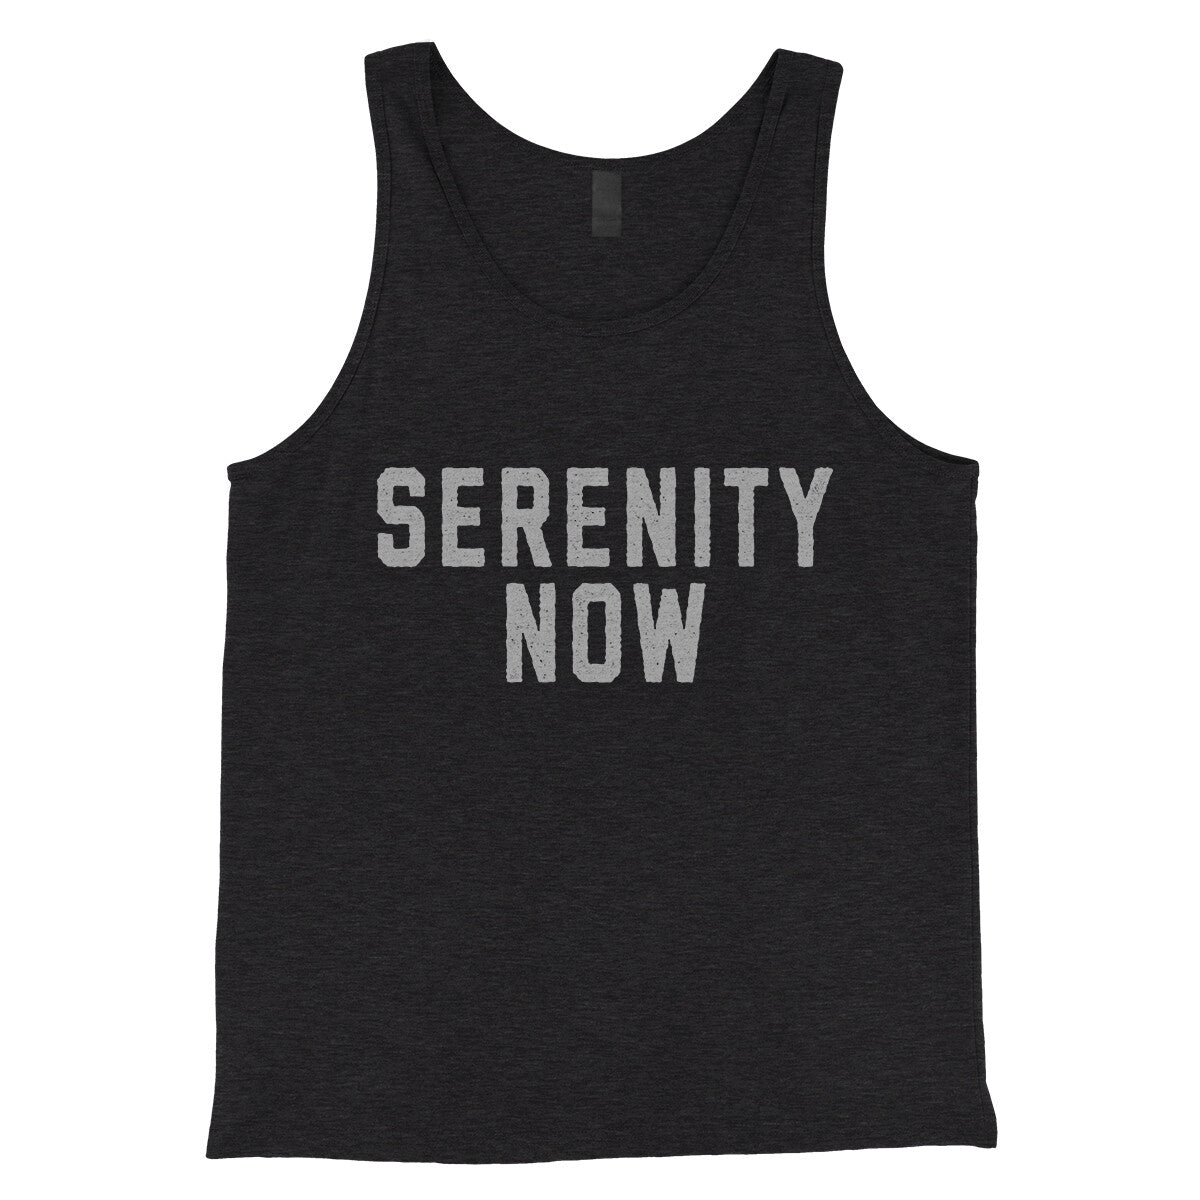 Serenity Now in Charcoal Black TriBlend Color